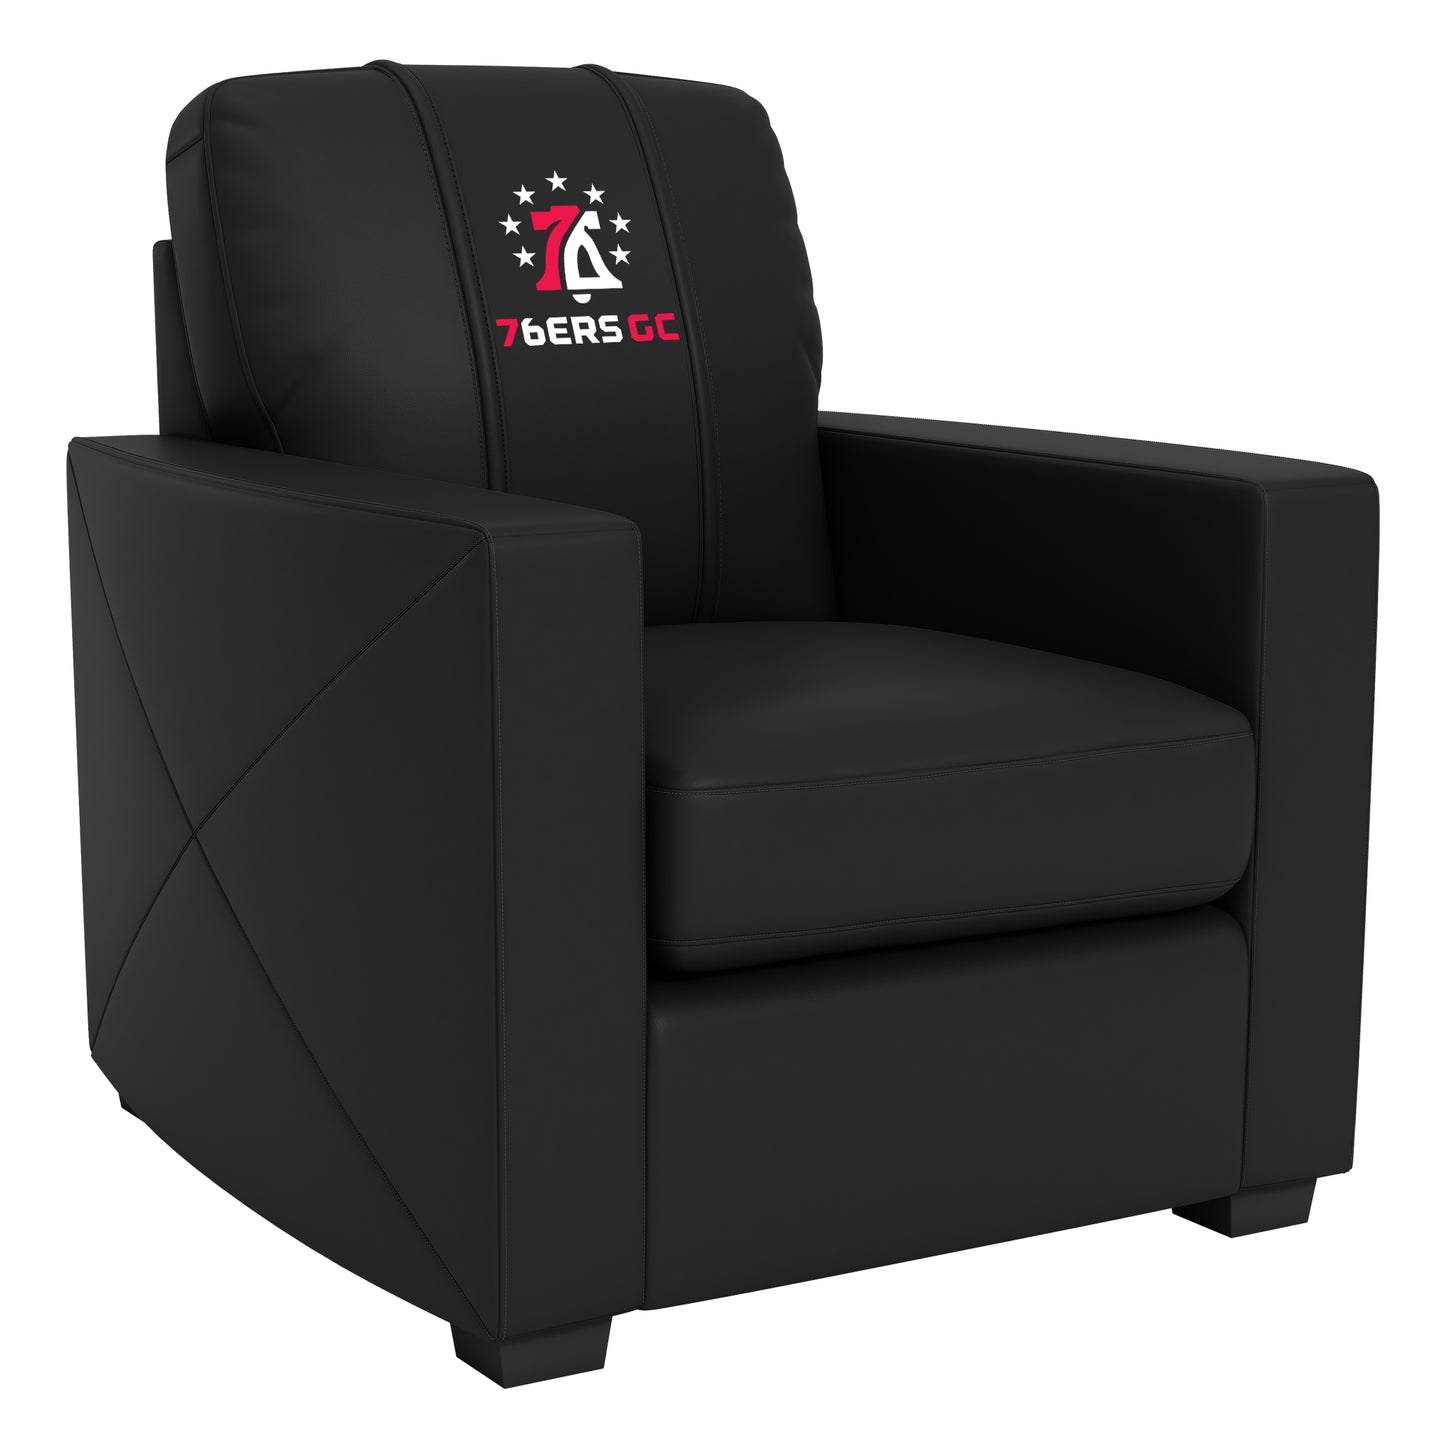 Silver Club Chair with Philadelphia 76ers GC [CAN ONLY BE SHIPPED TO PENNSYLVANIA]